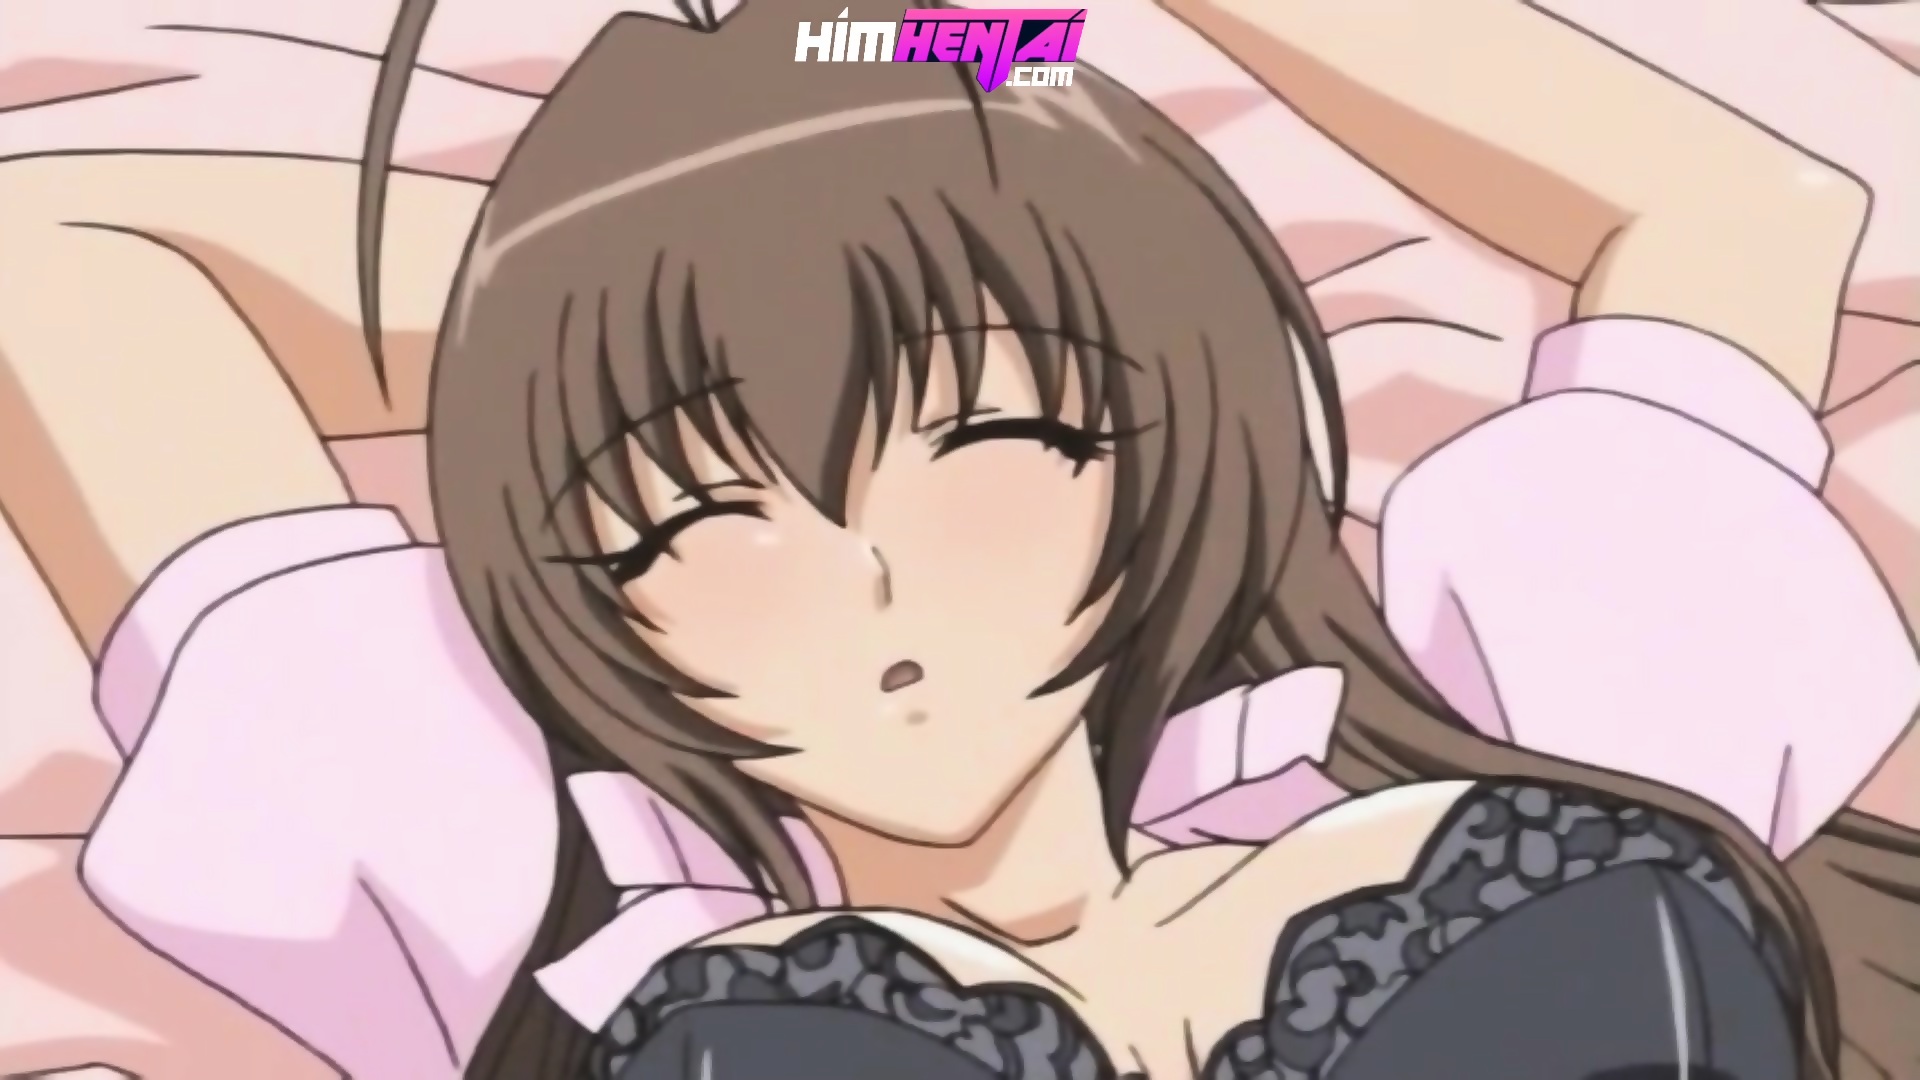 Anime Hentai, Animation He Finds His Stepsister Asleep And Masturbates Her With A Dildo Anime Hentai, Animation !!!!!